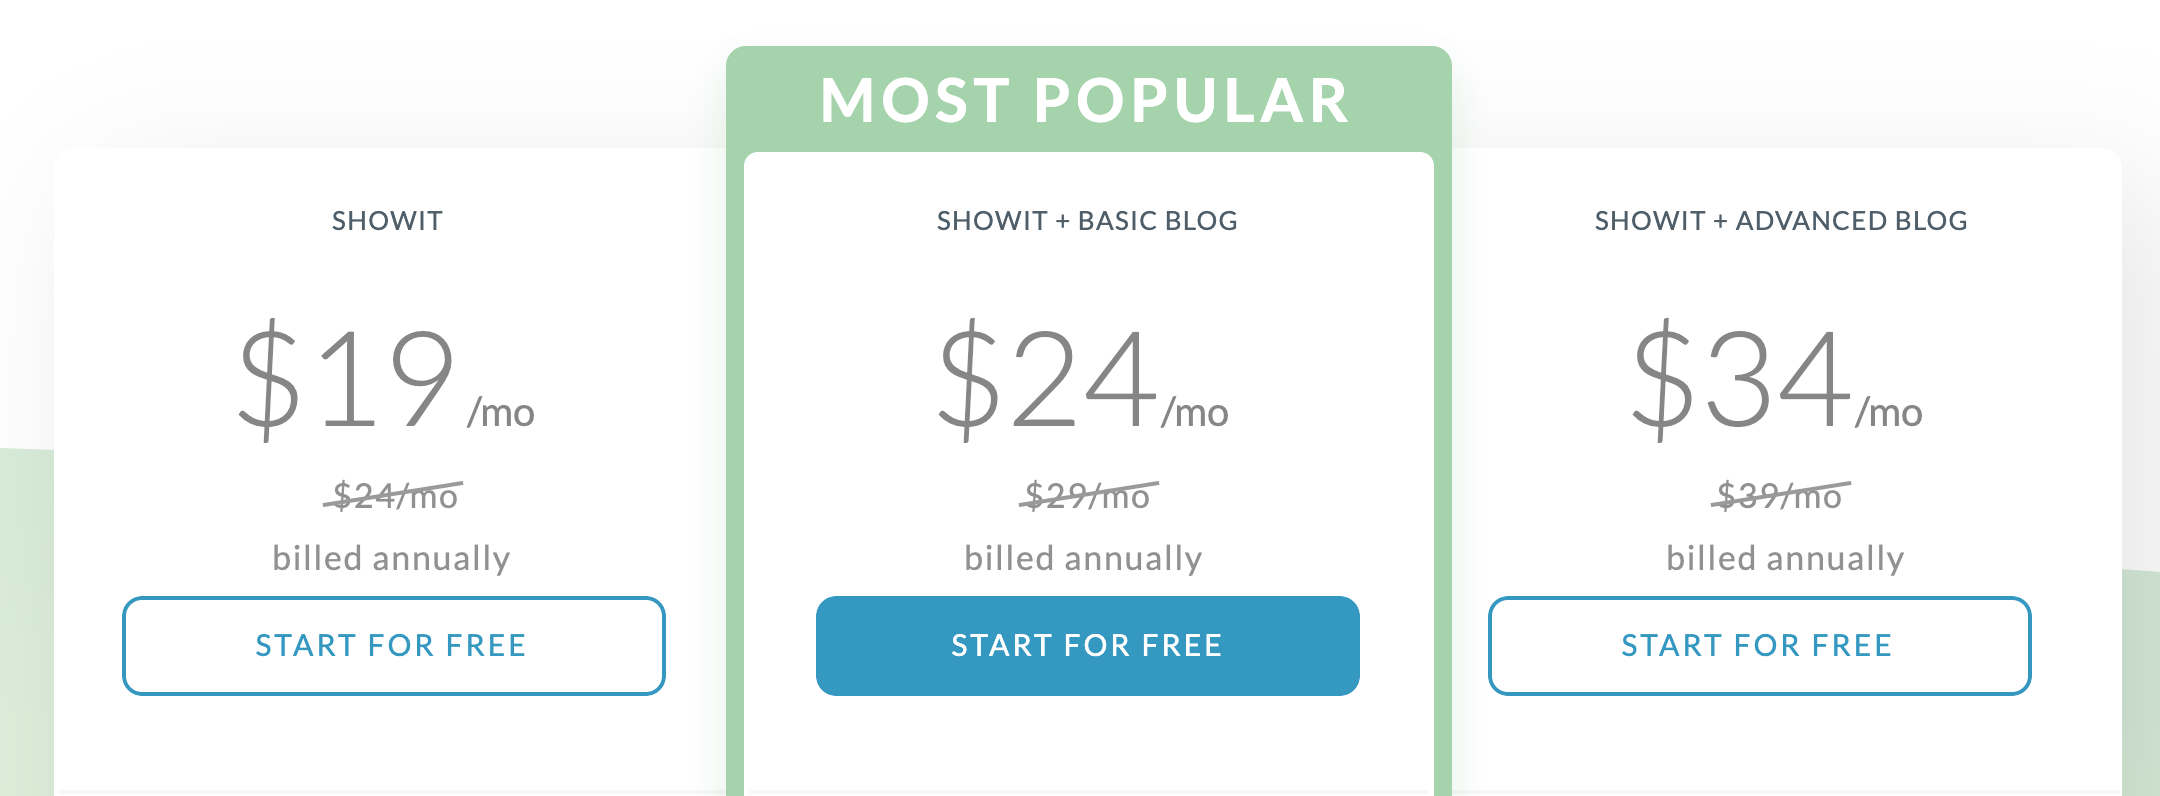 Showit Pricing Page with 3 pricing tiers